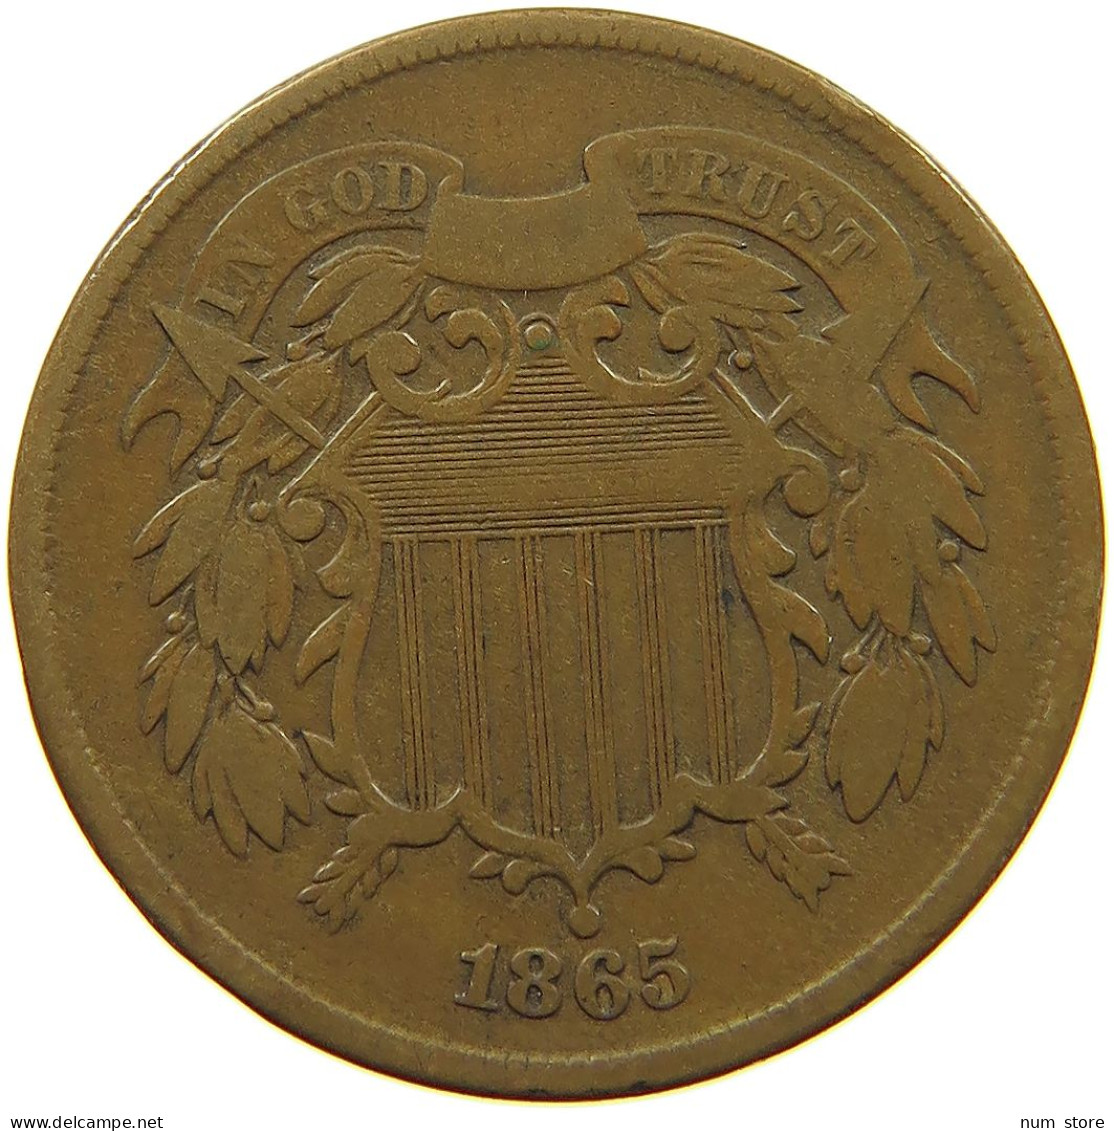 UNITED STATES OF AMERICA 2 CENTS 1865  #c010 0121 - 2, 3 & 20 Cents